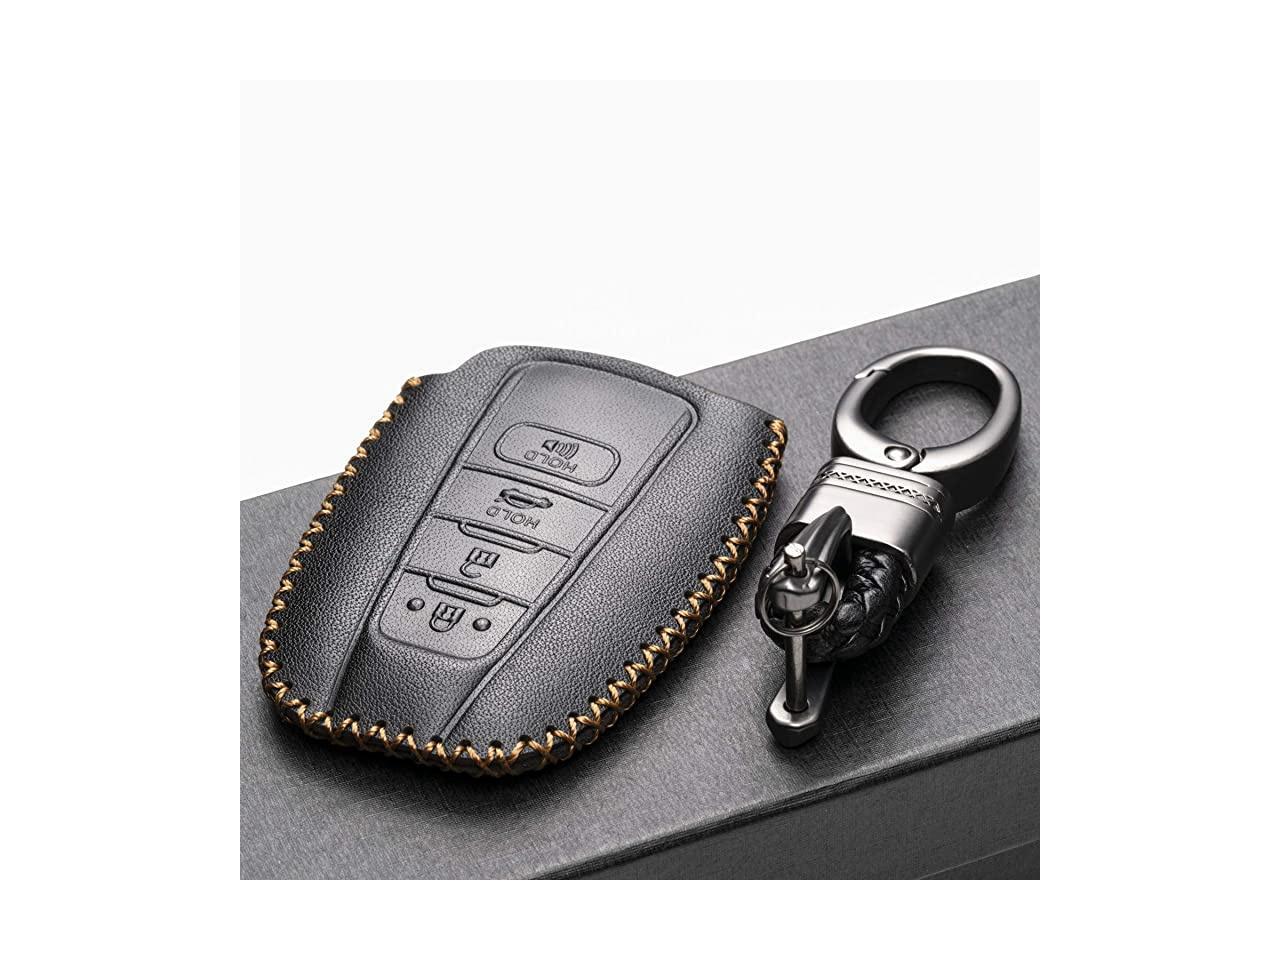 Genuine Leather Remote Key Fob Case Cover Protector with Key Chain for